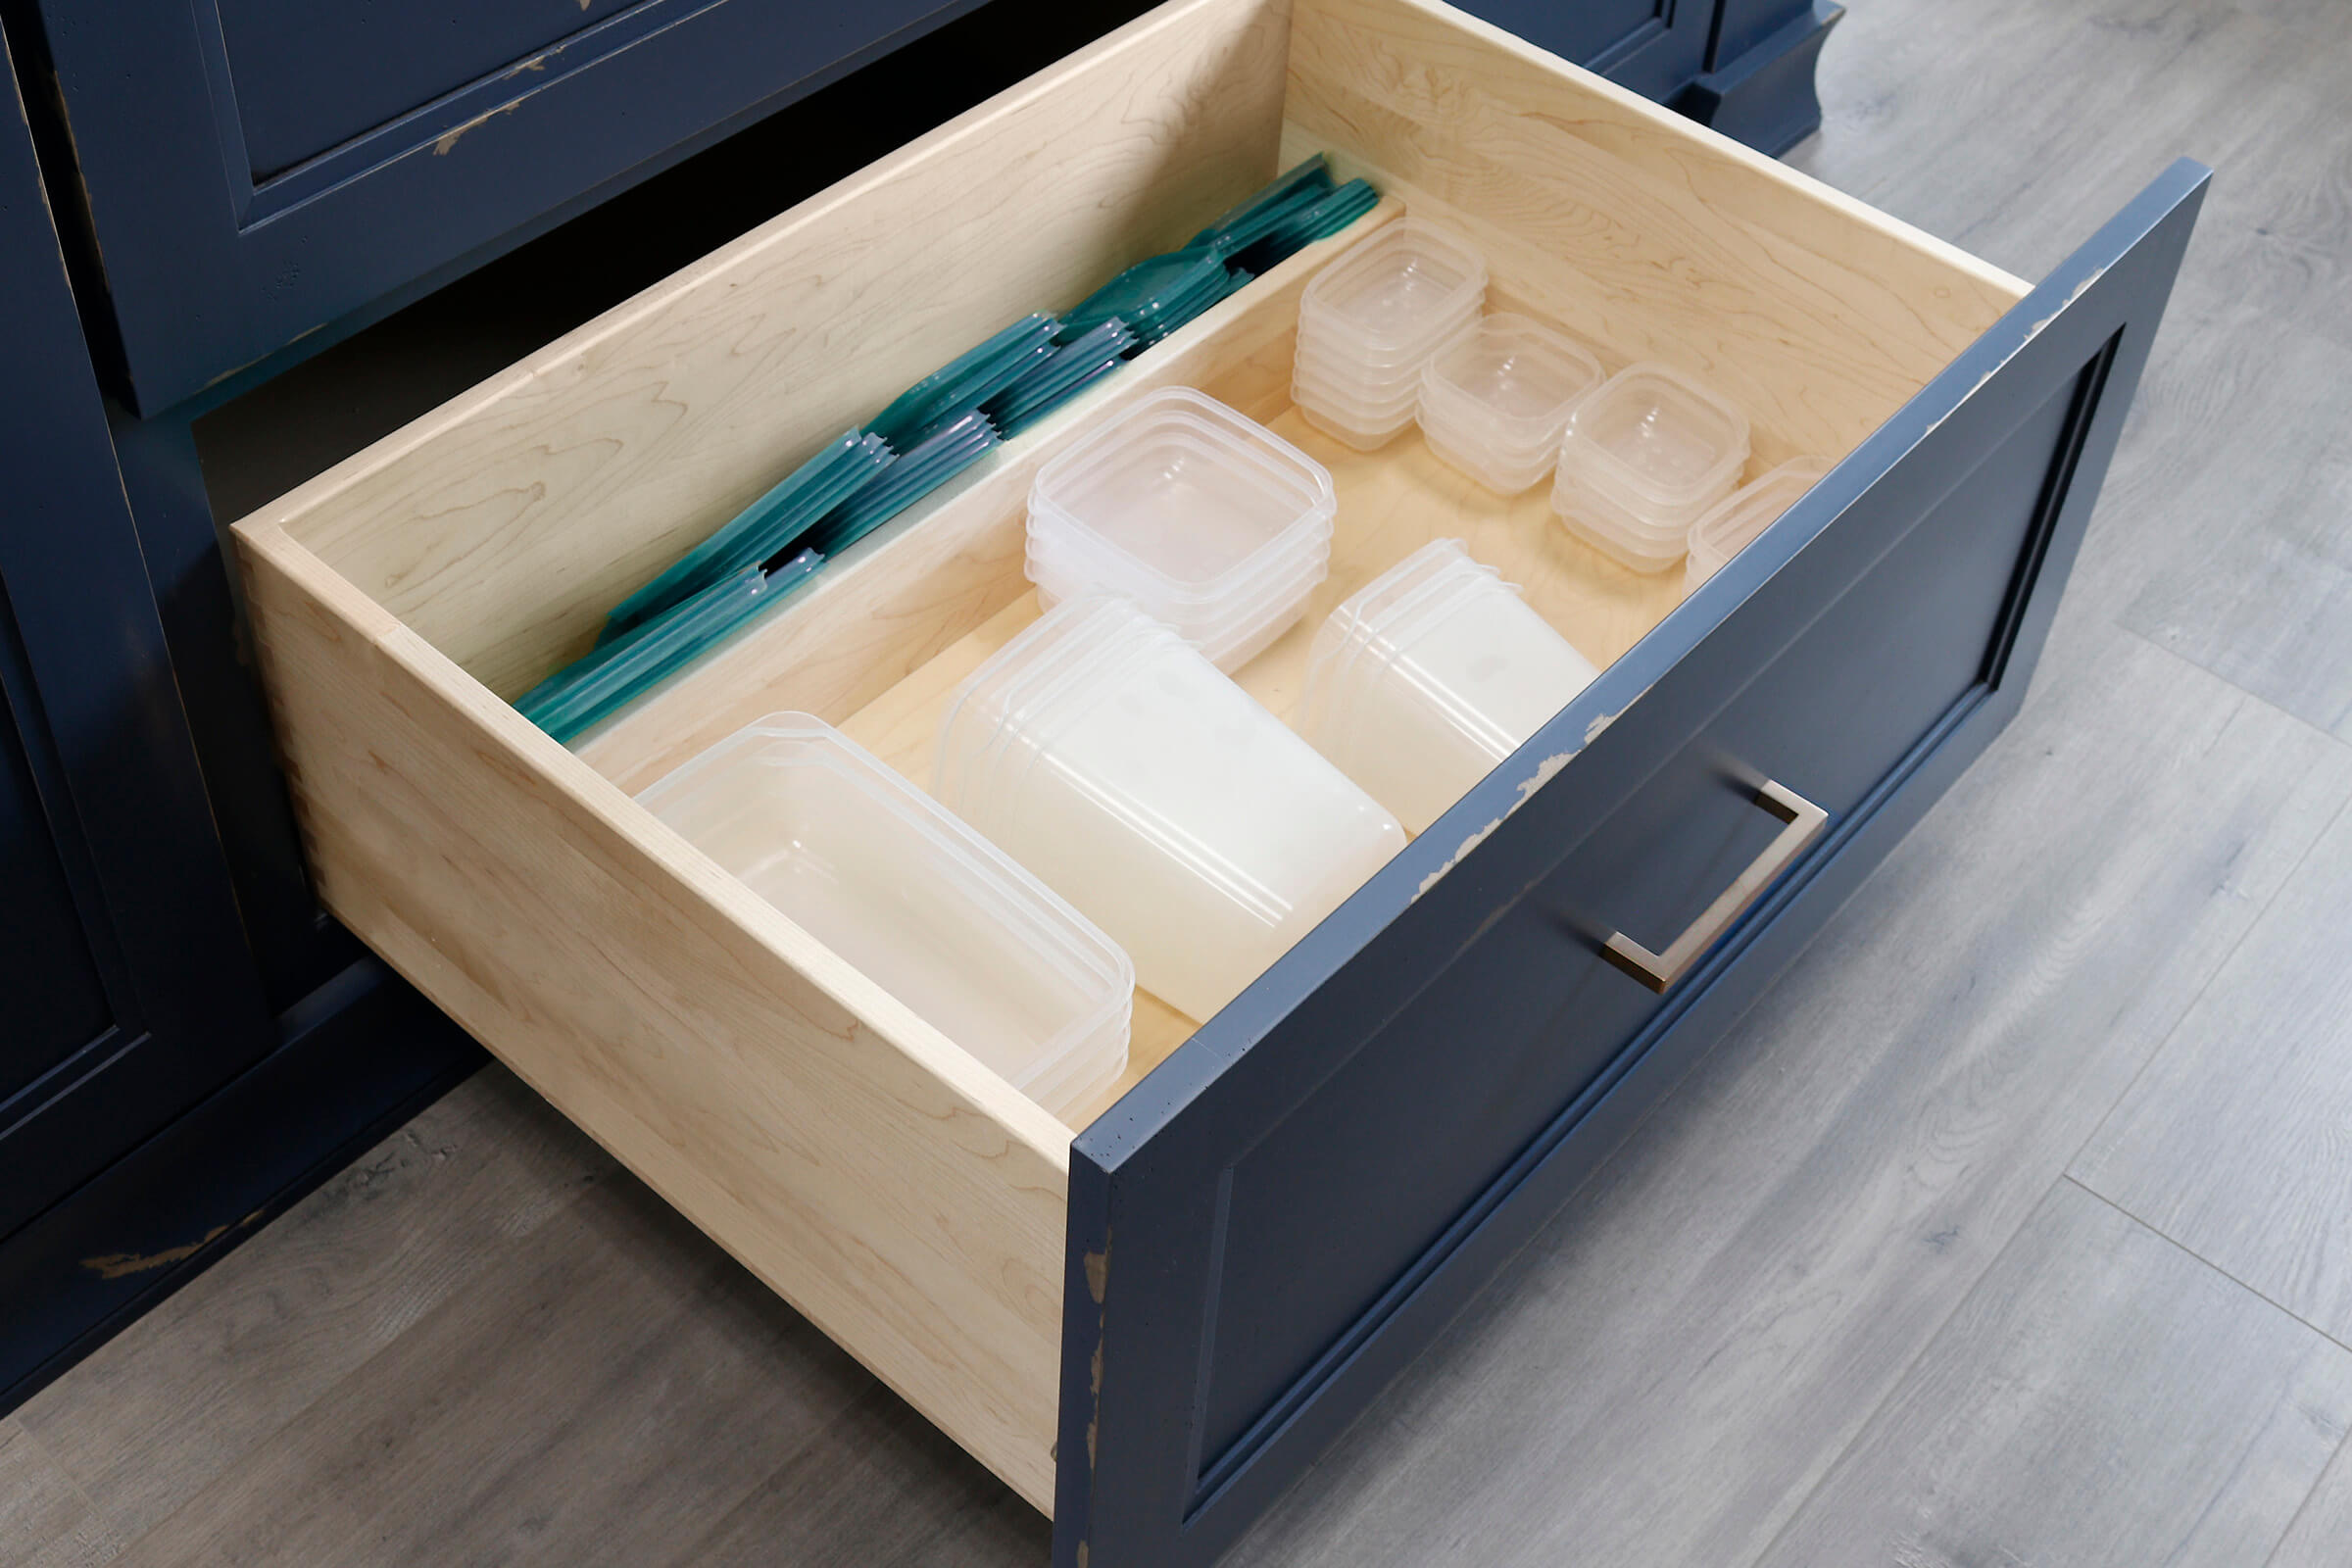 A Lid Storage Partition at the back of a wide, deep drawer neatly stores plastic containers and lids in a neatly fashion.